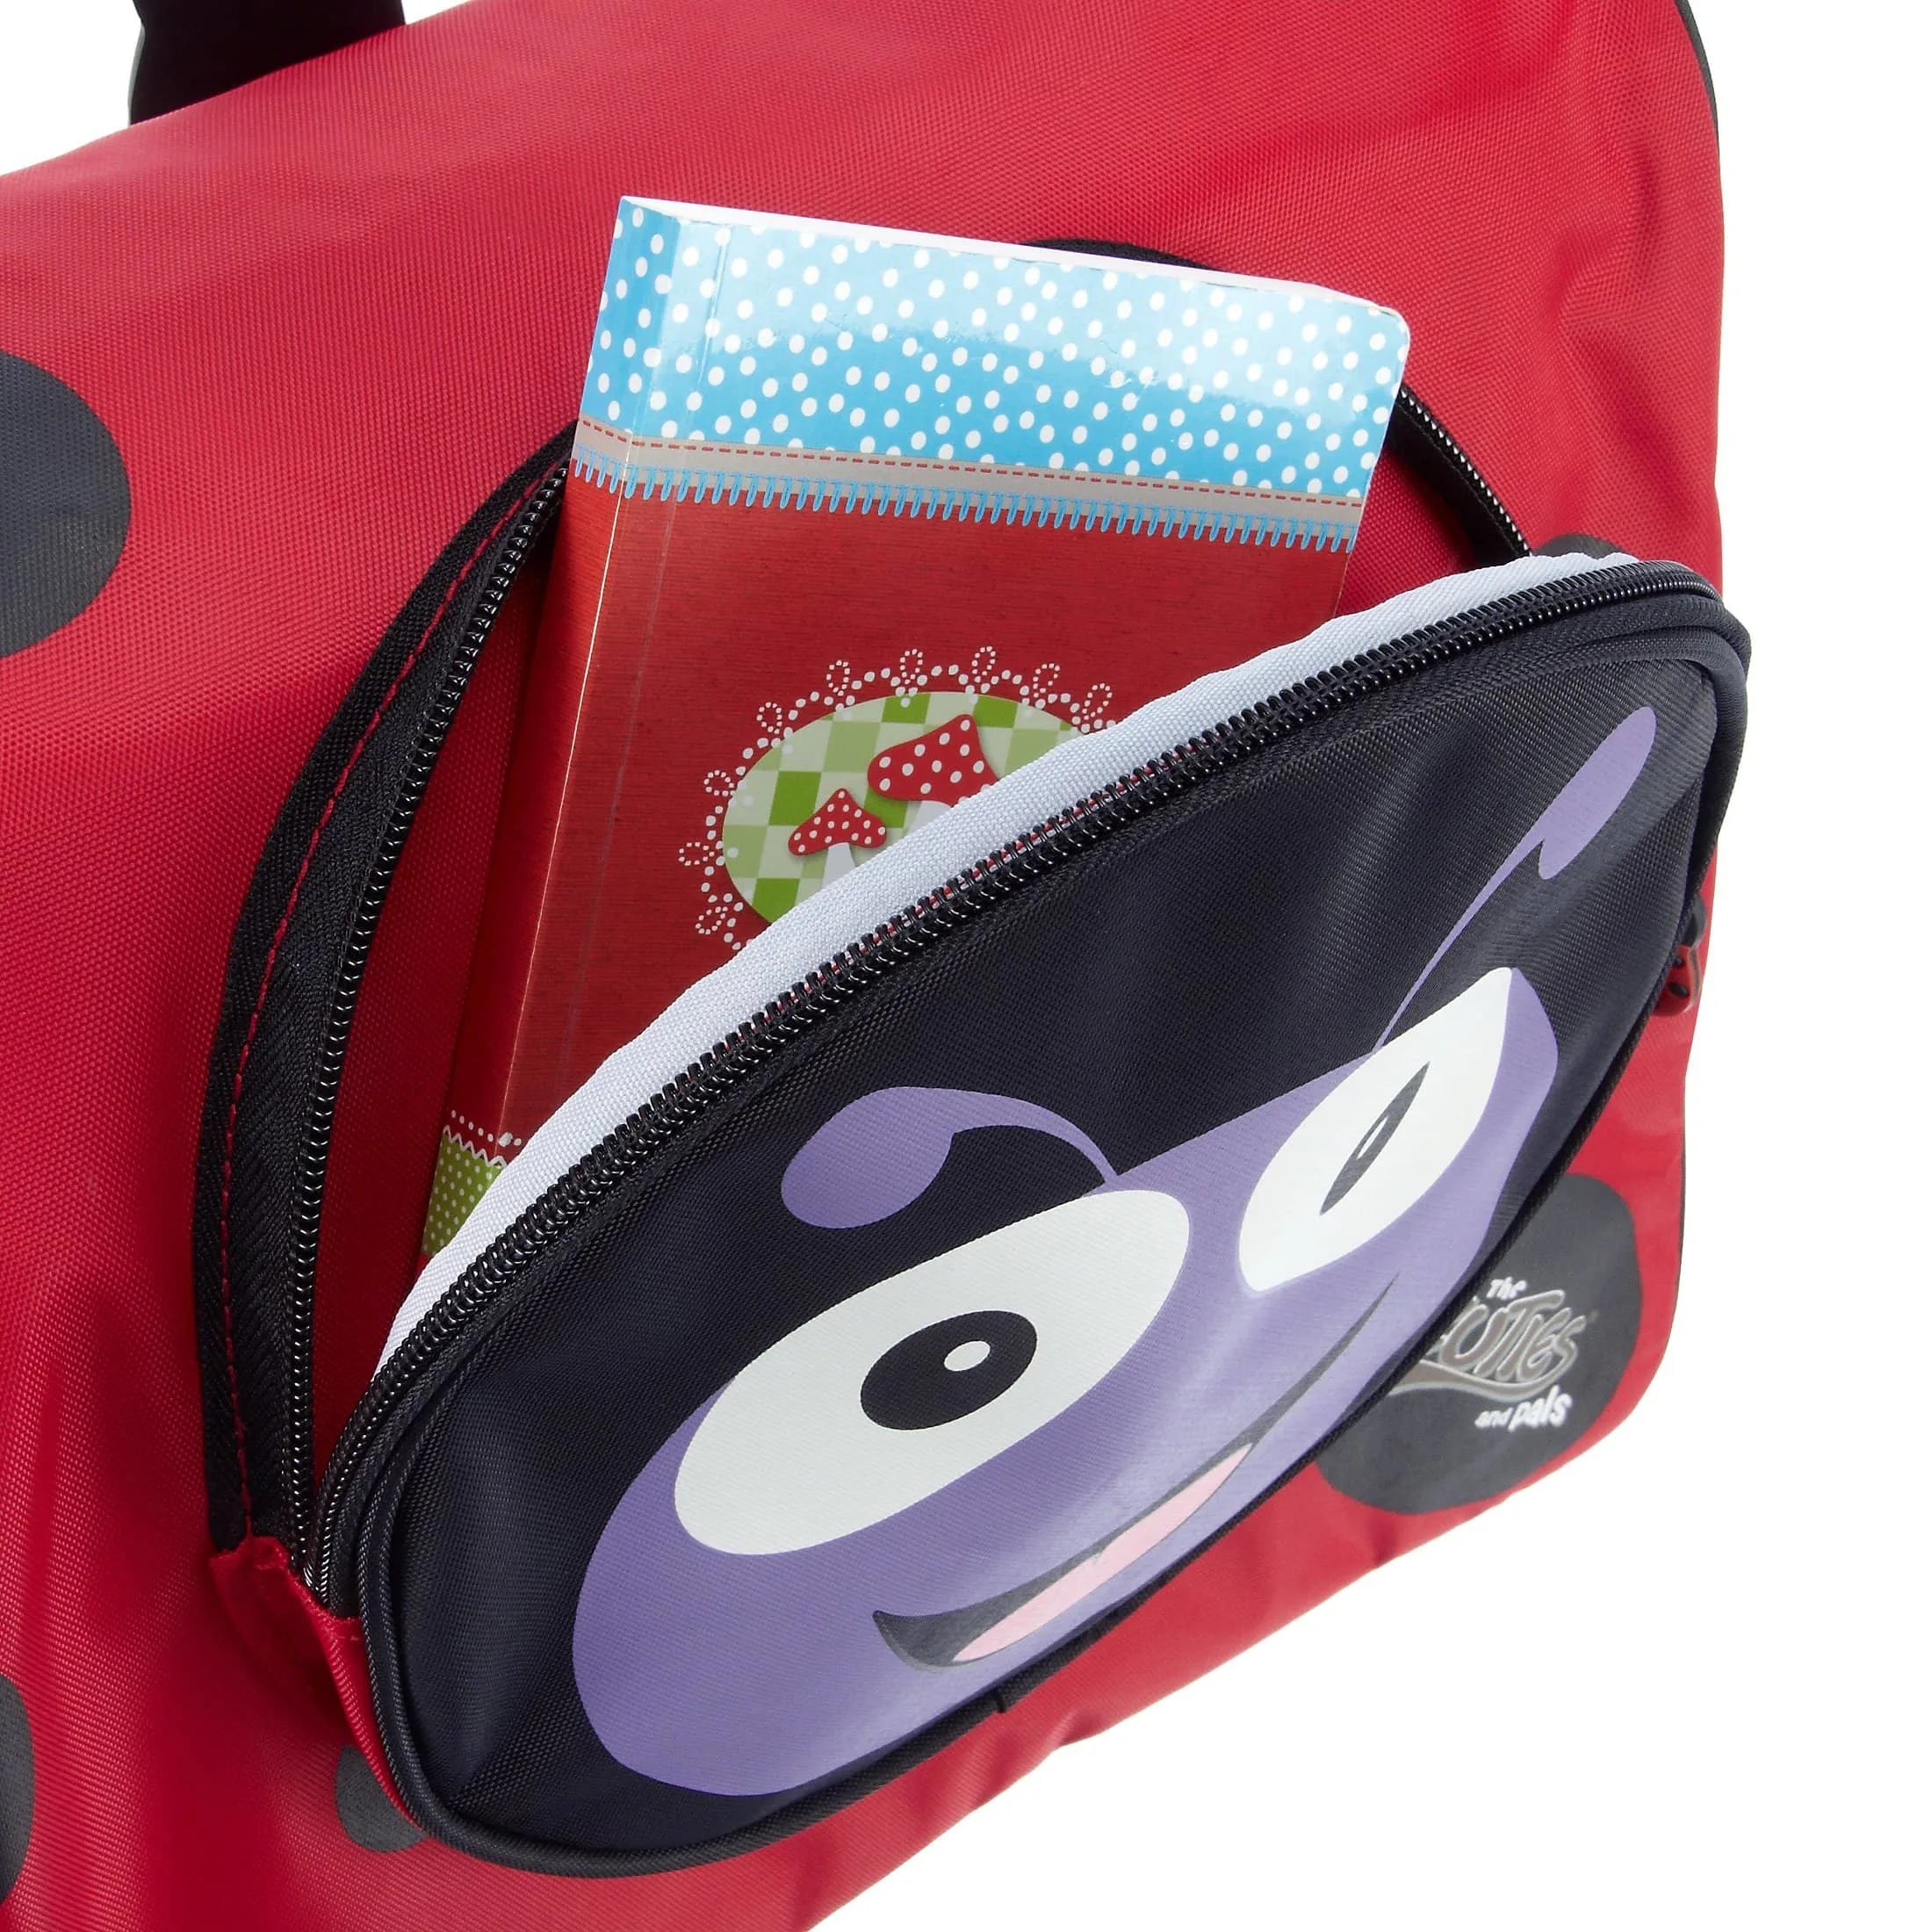 The Cuties and Pals Soft Cuties backpack 30 cm - ladybug